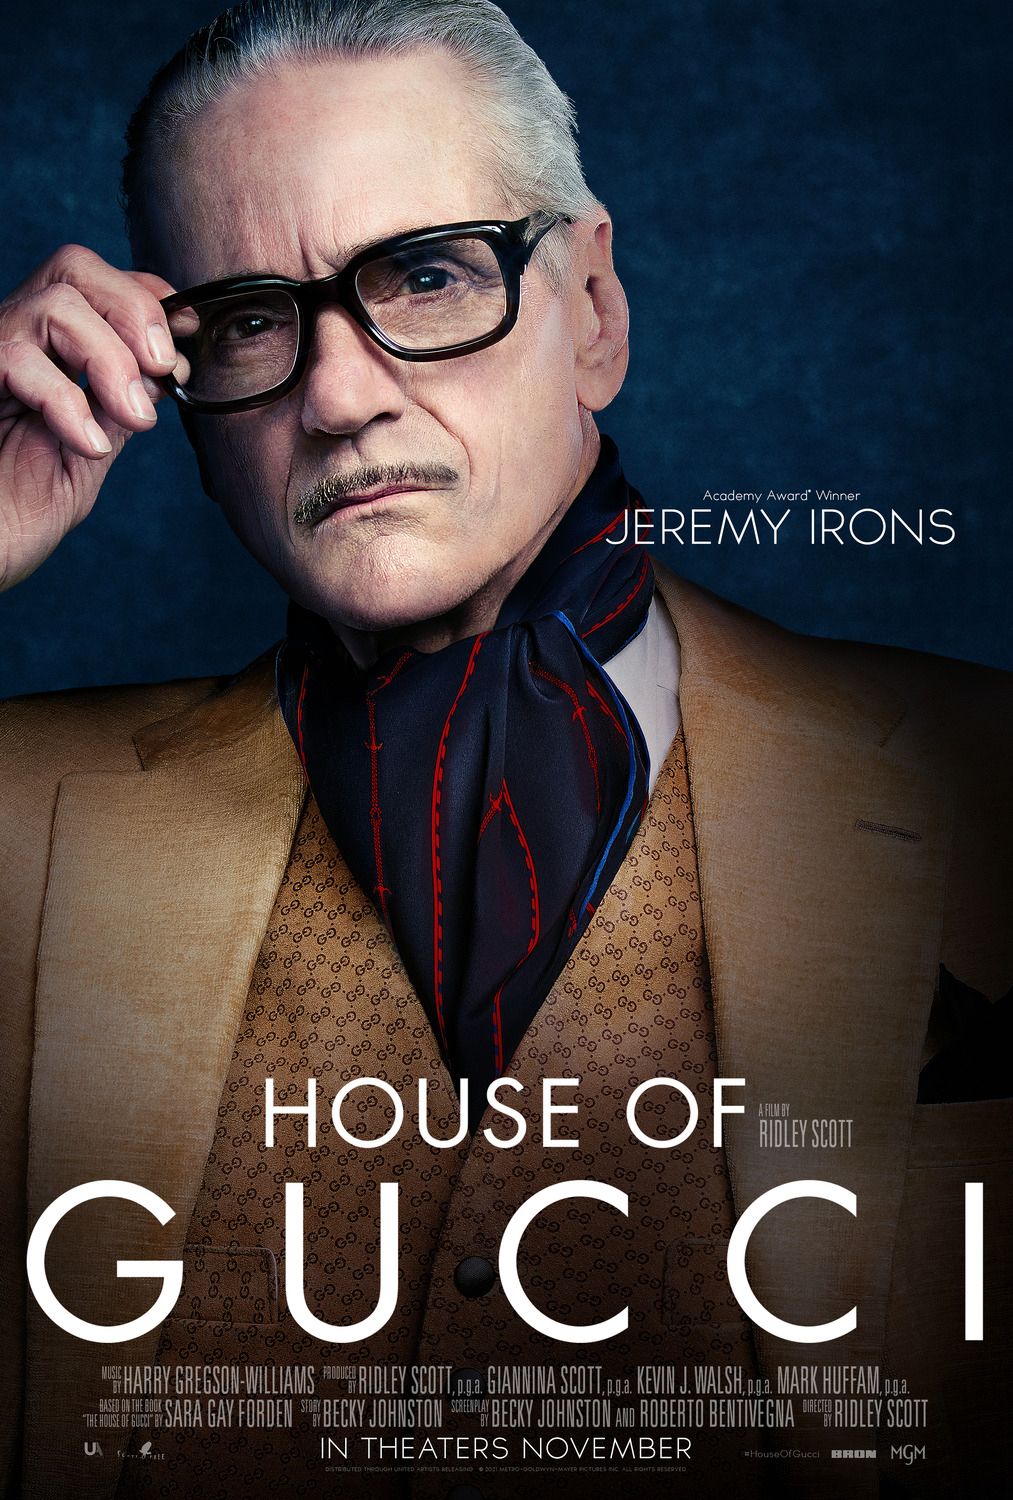 House of Gucci poster #4 Jeremy Irons